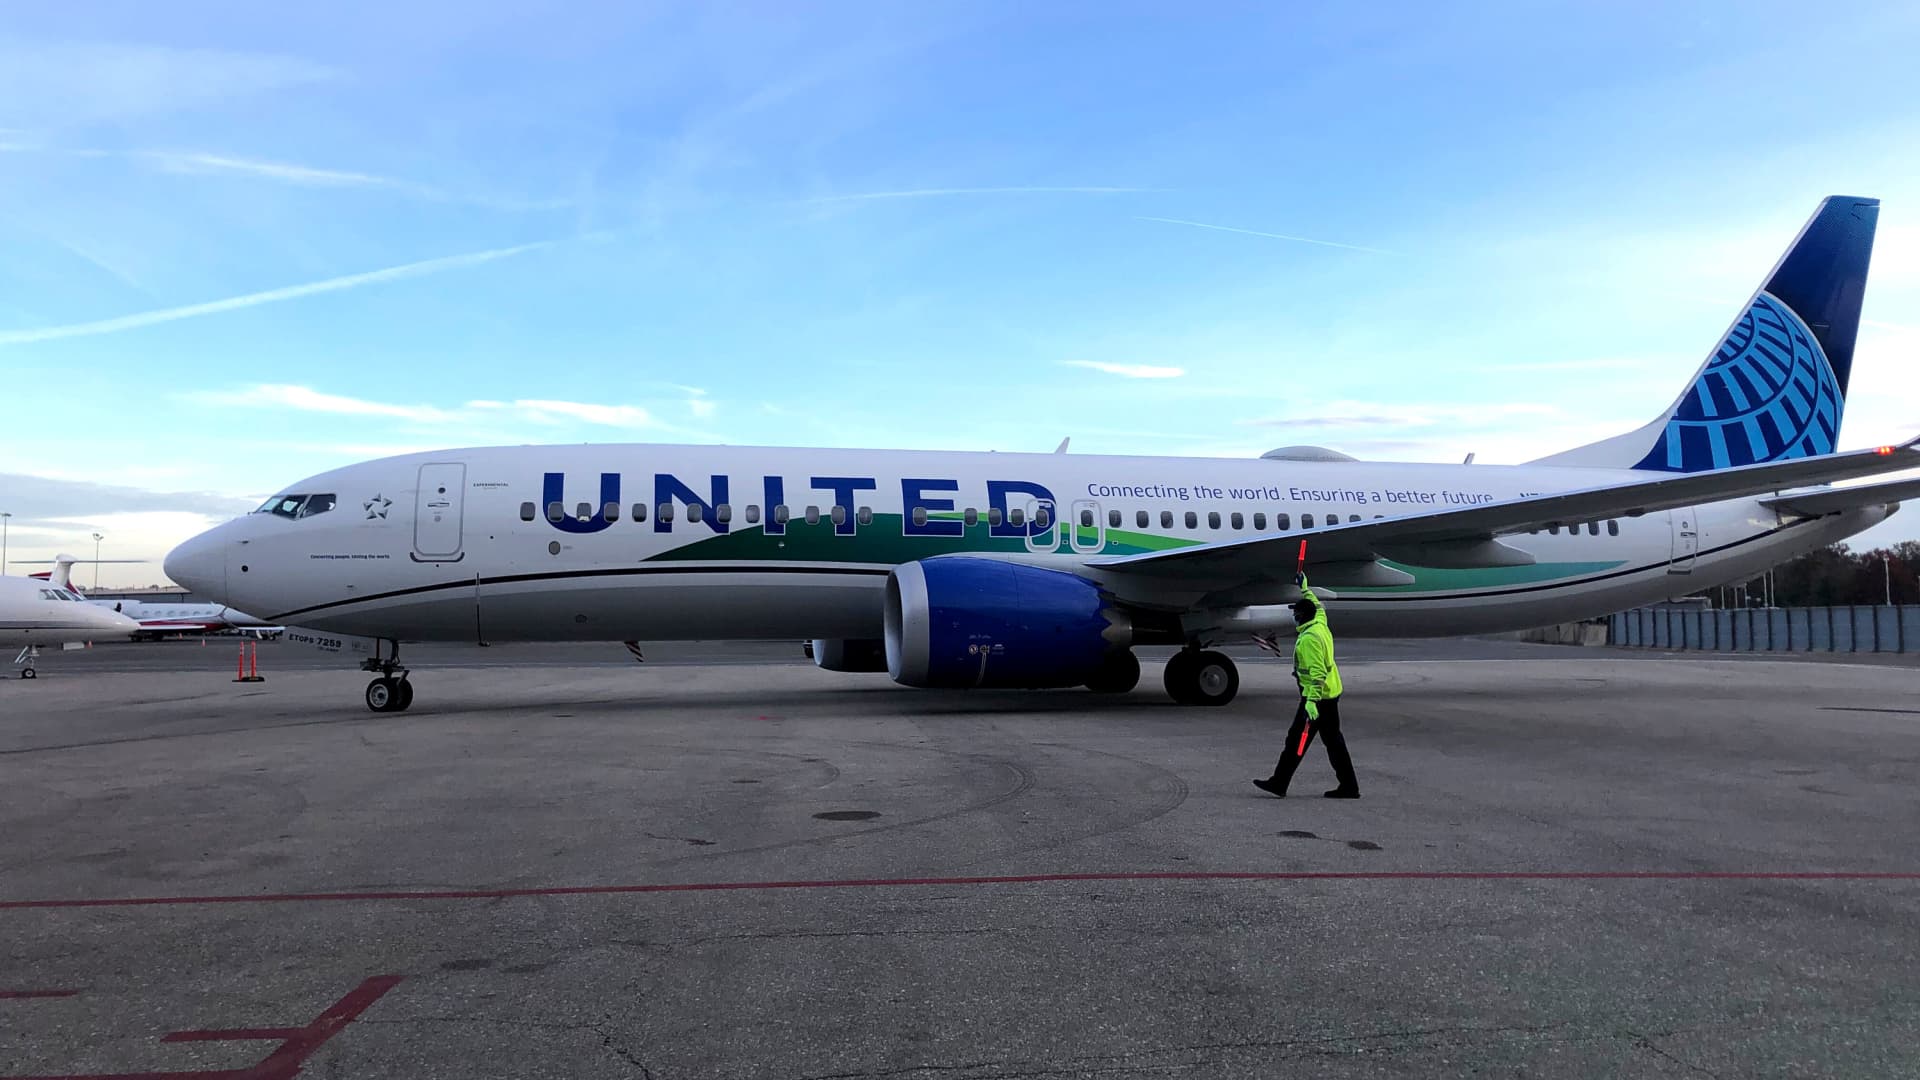 FAA clears United Airlines to add new aircraft, routes after safety review